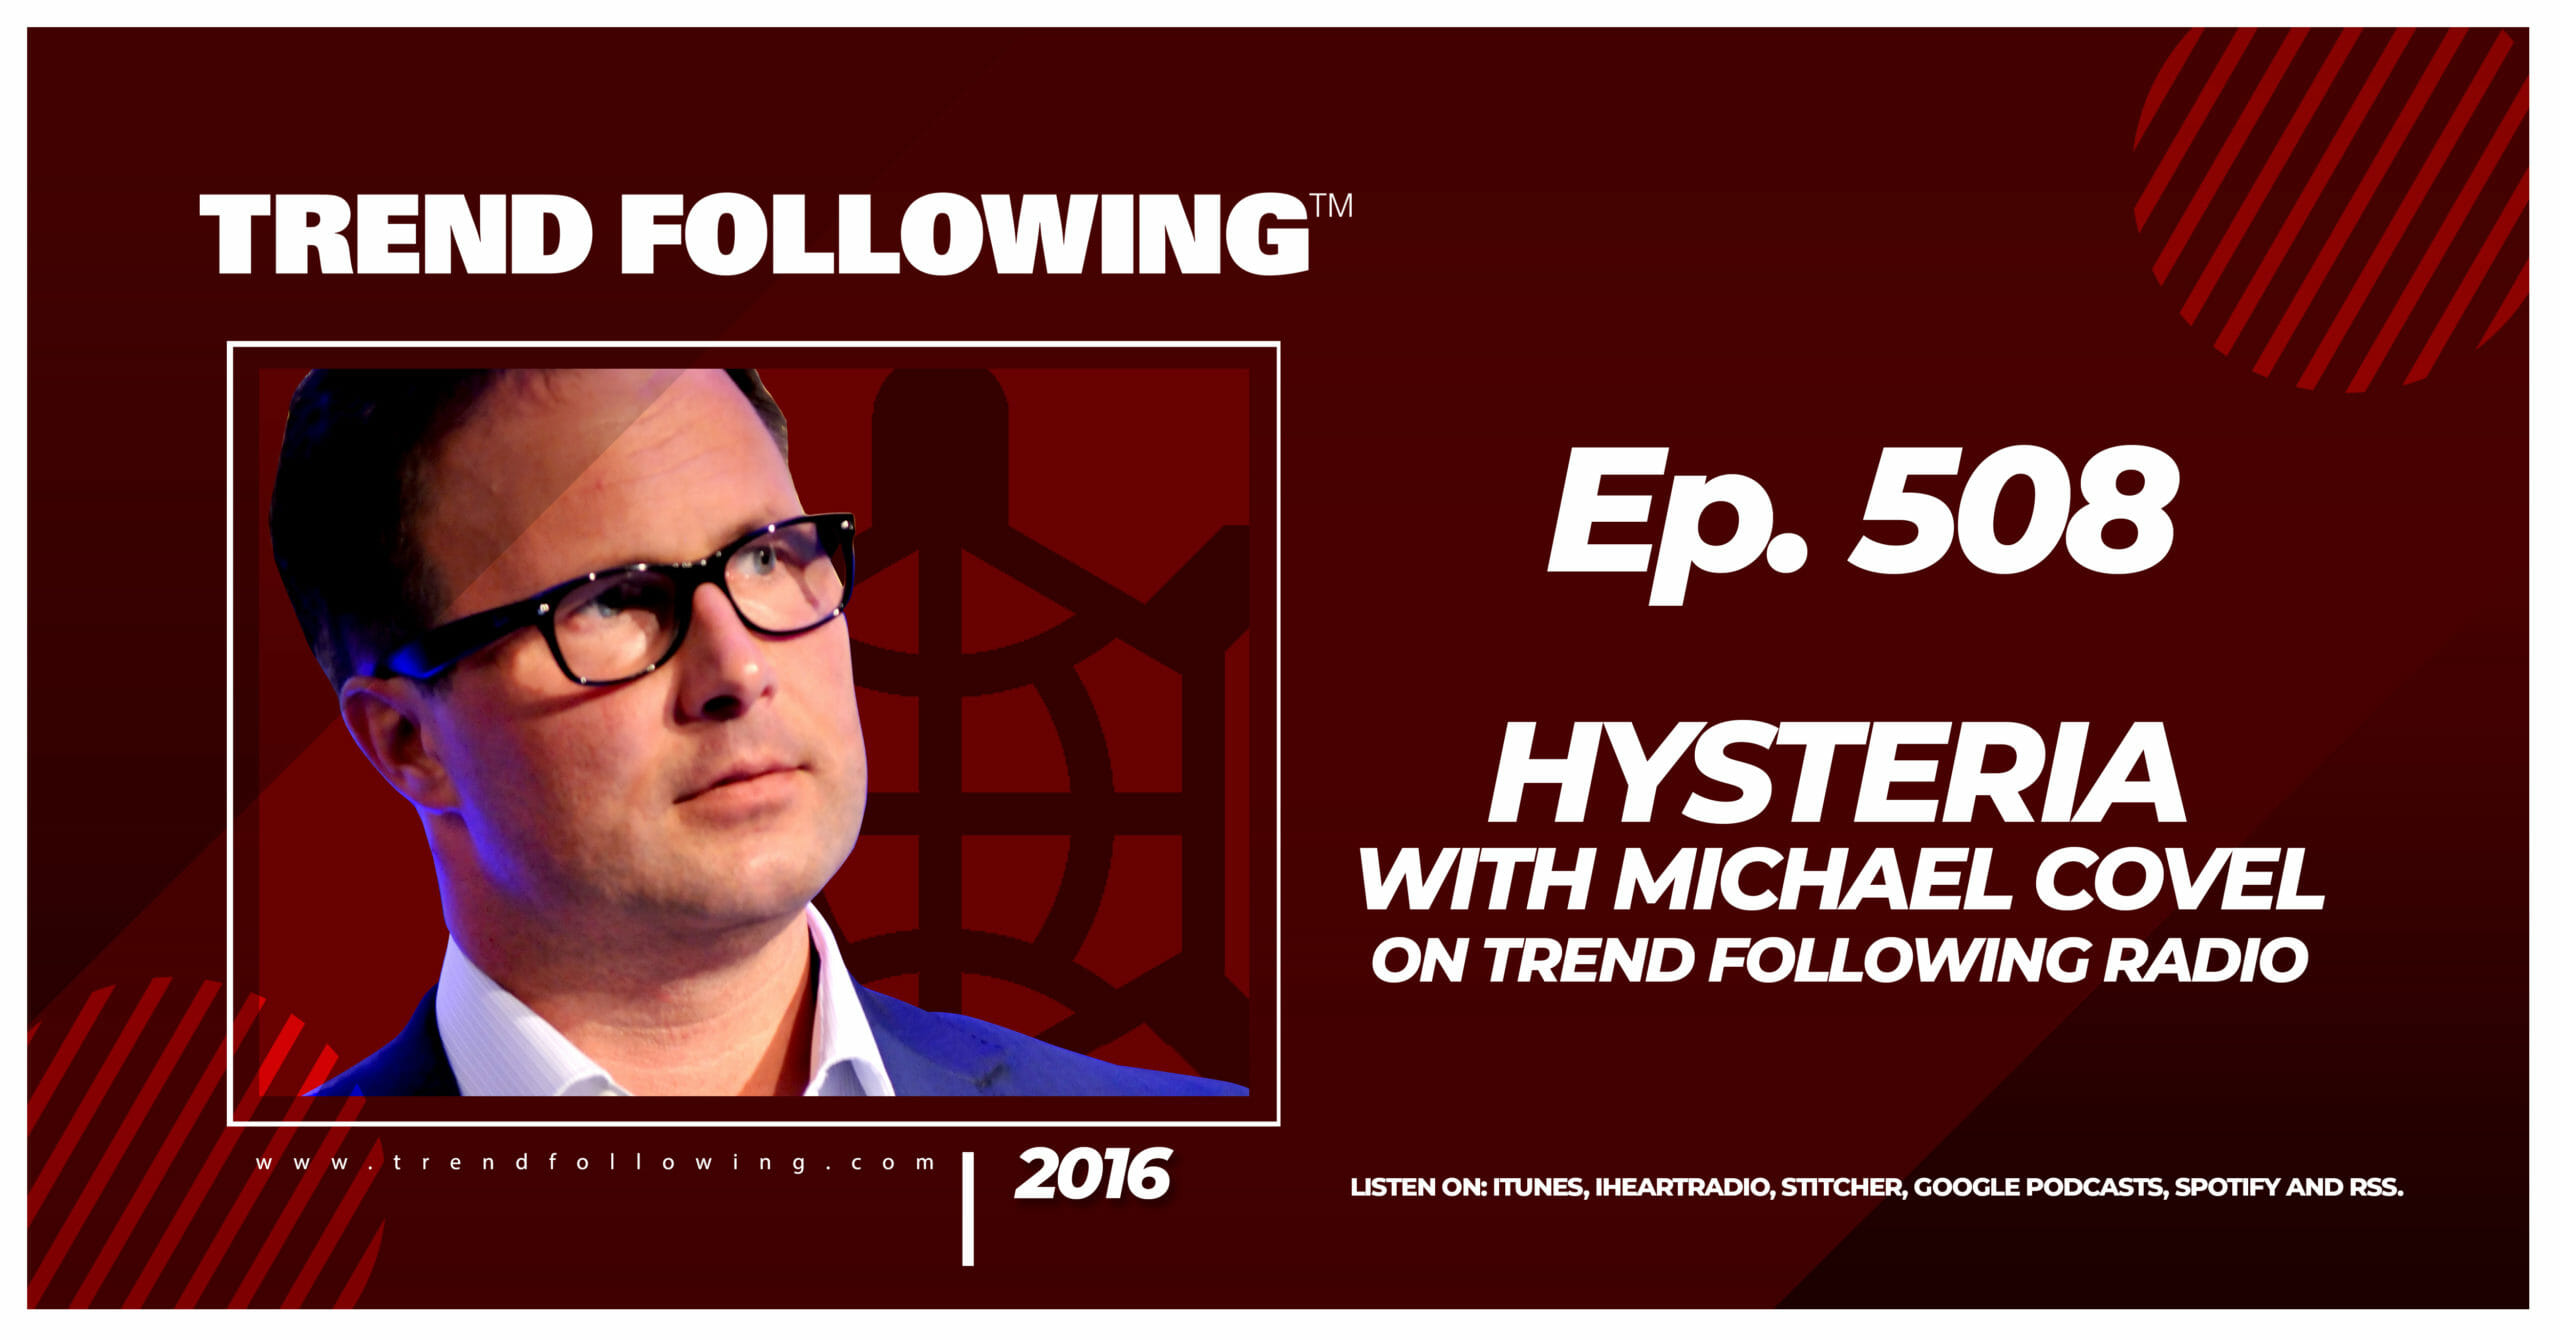 Hysteria with Michael Covel on Trend Following